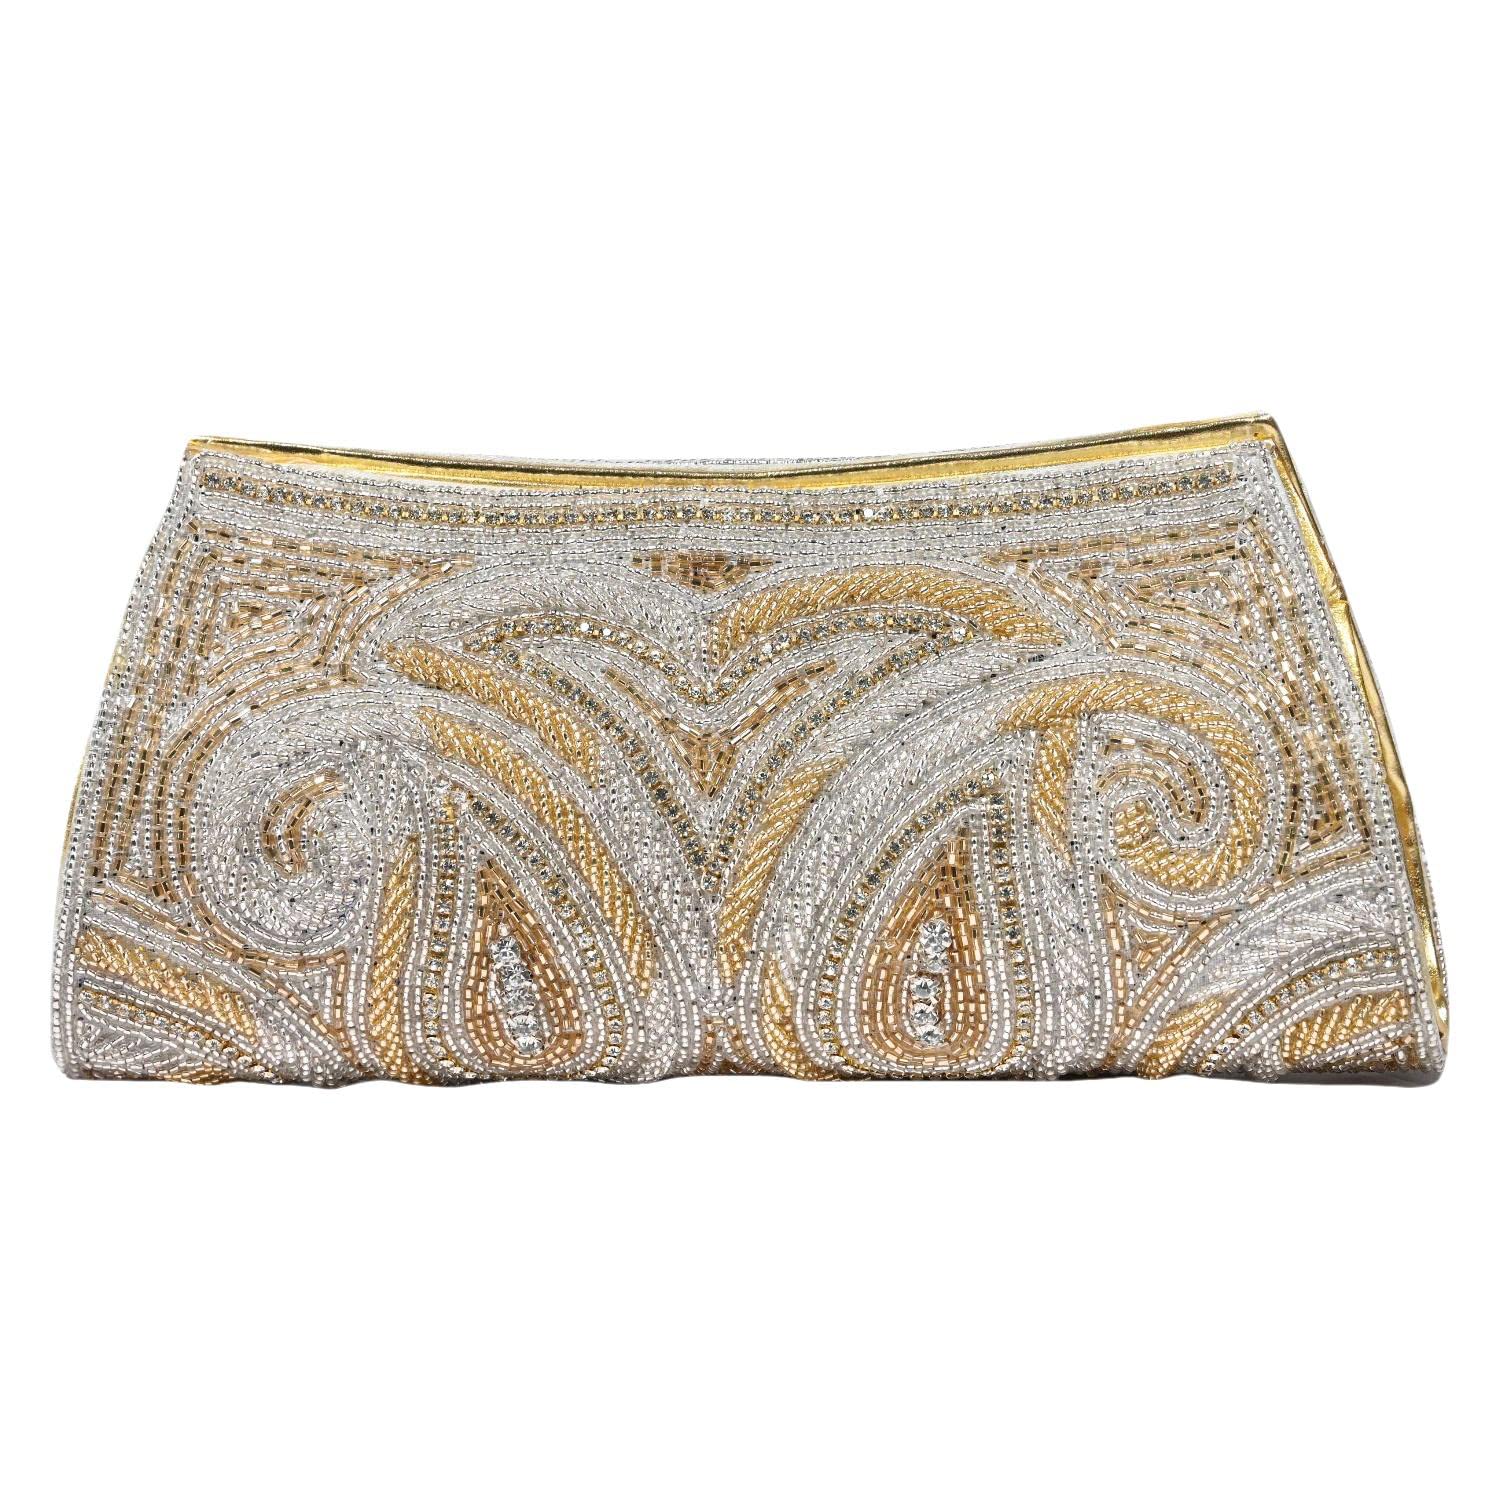 FALAH HANDICRAFTS SOCIETY FHS Stylish Golden and Silver Clutch for Weeding Occasion, Party Occasion